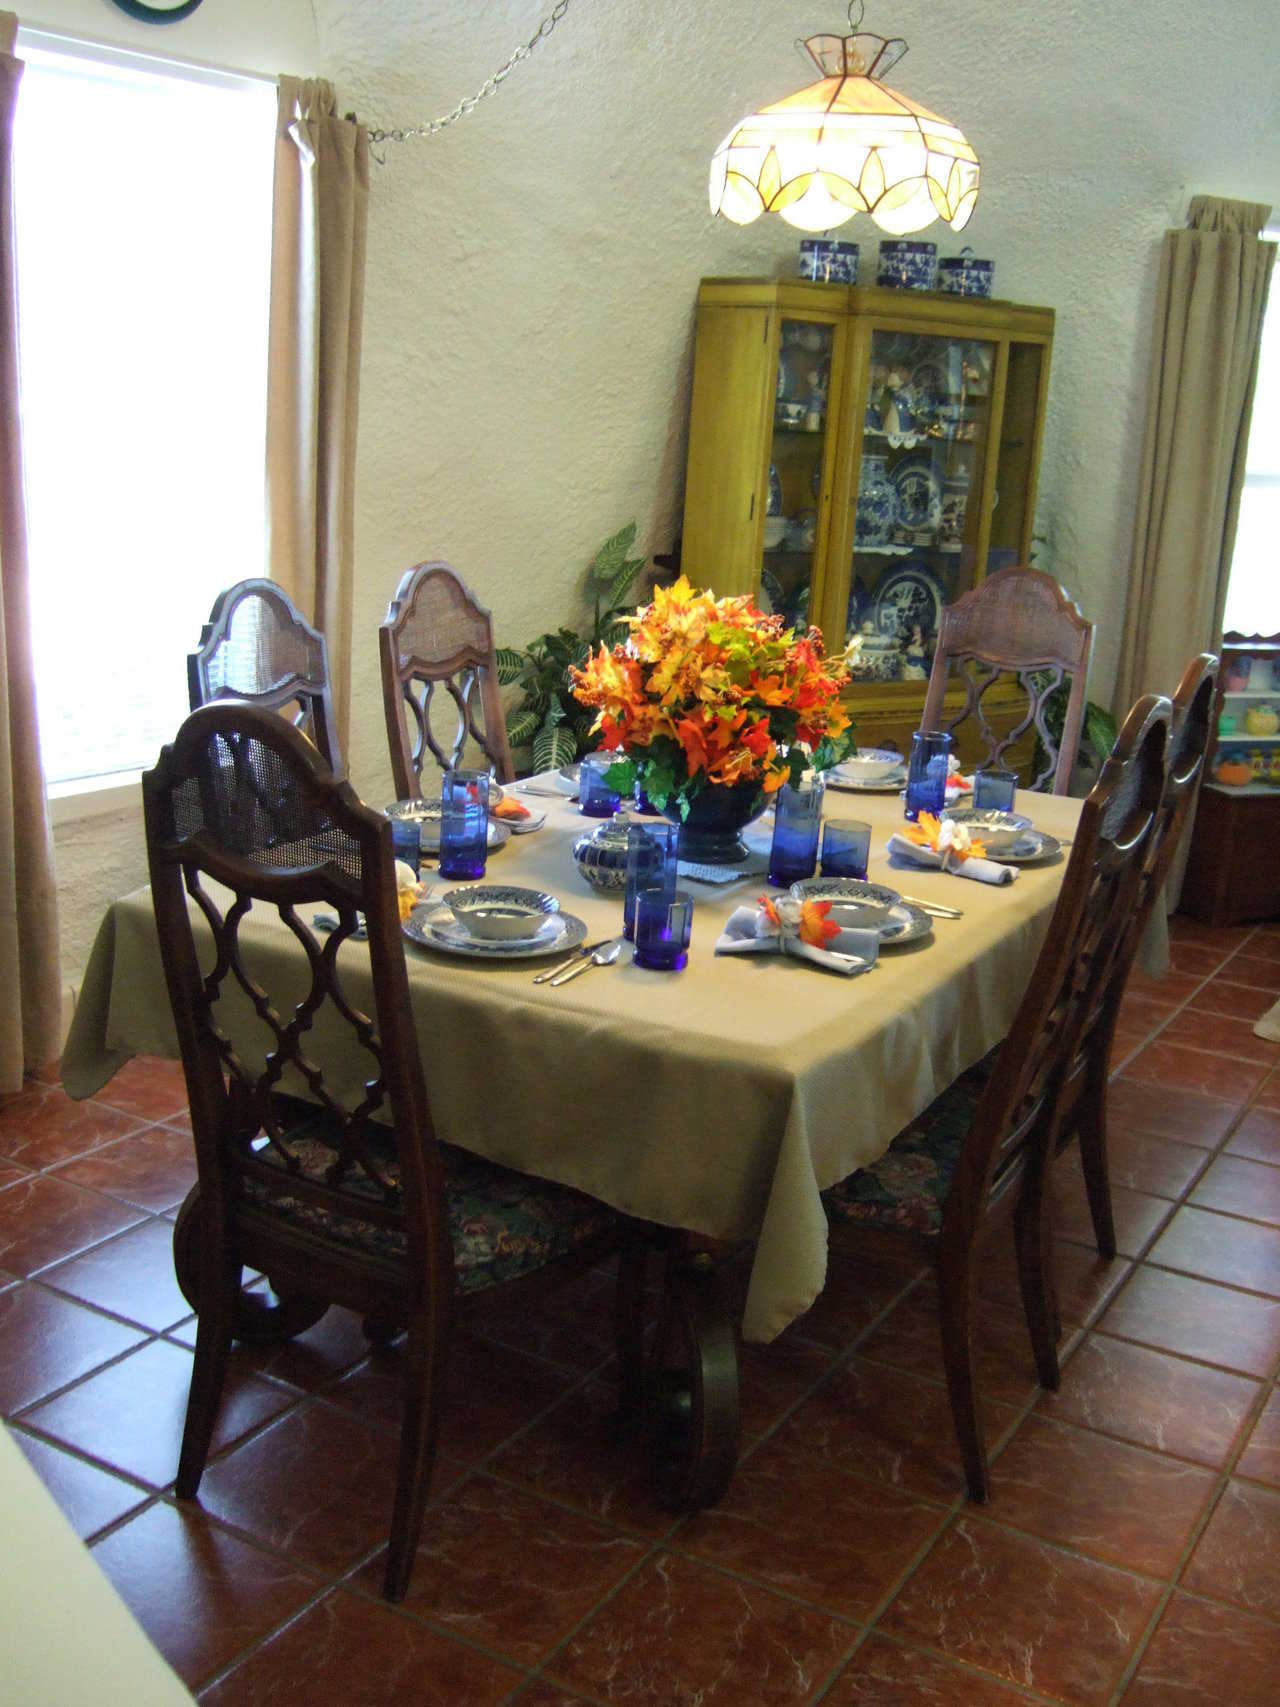 Dining area — It’s located just off the kitchen and adjacent to the living area.